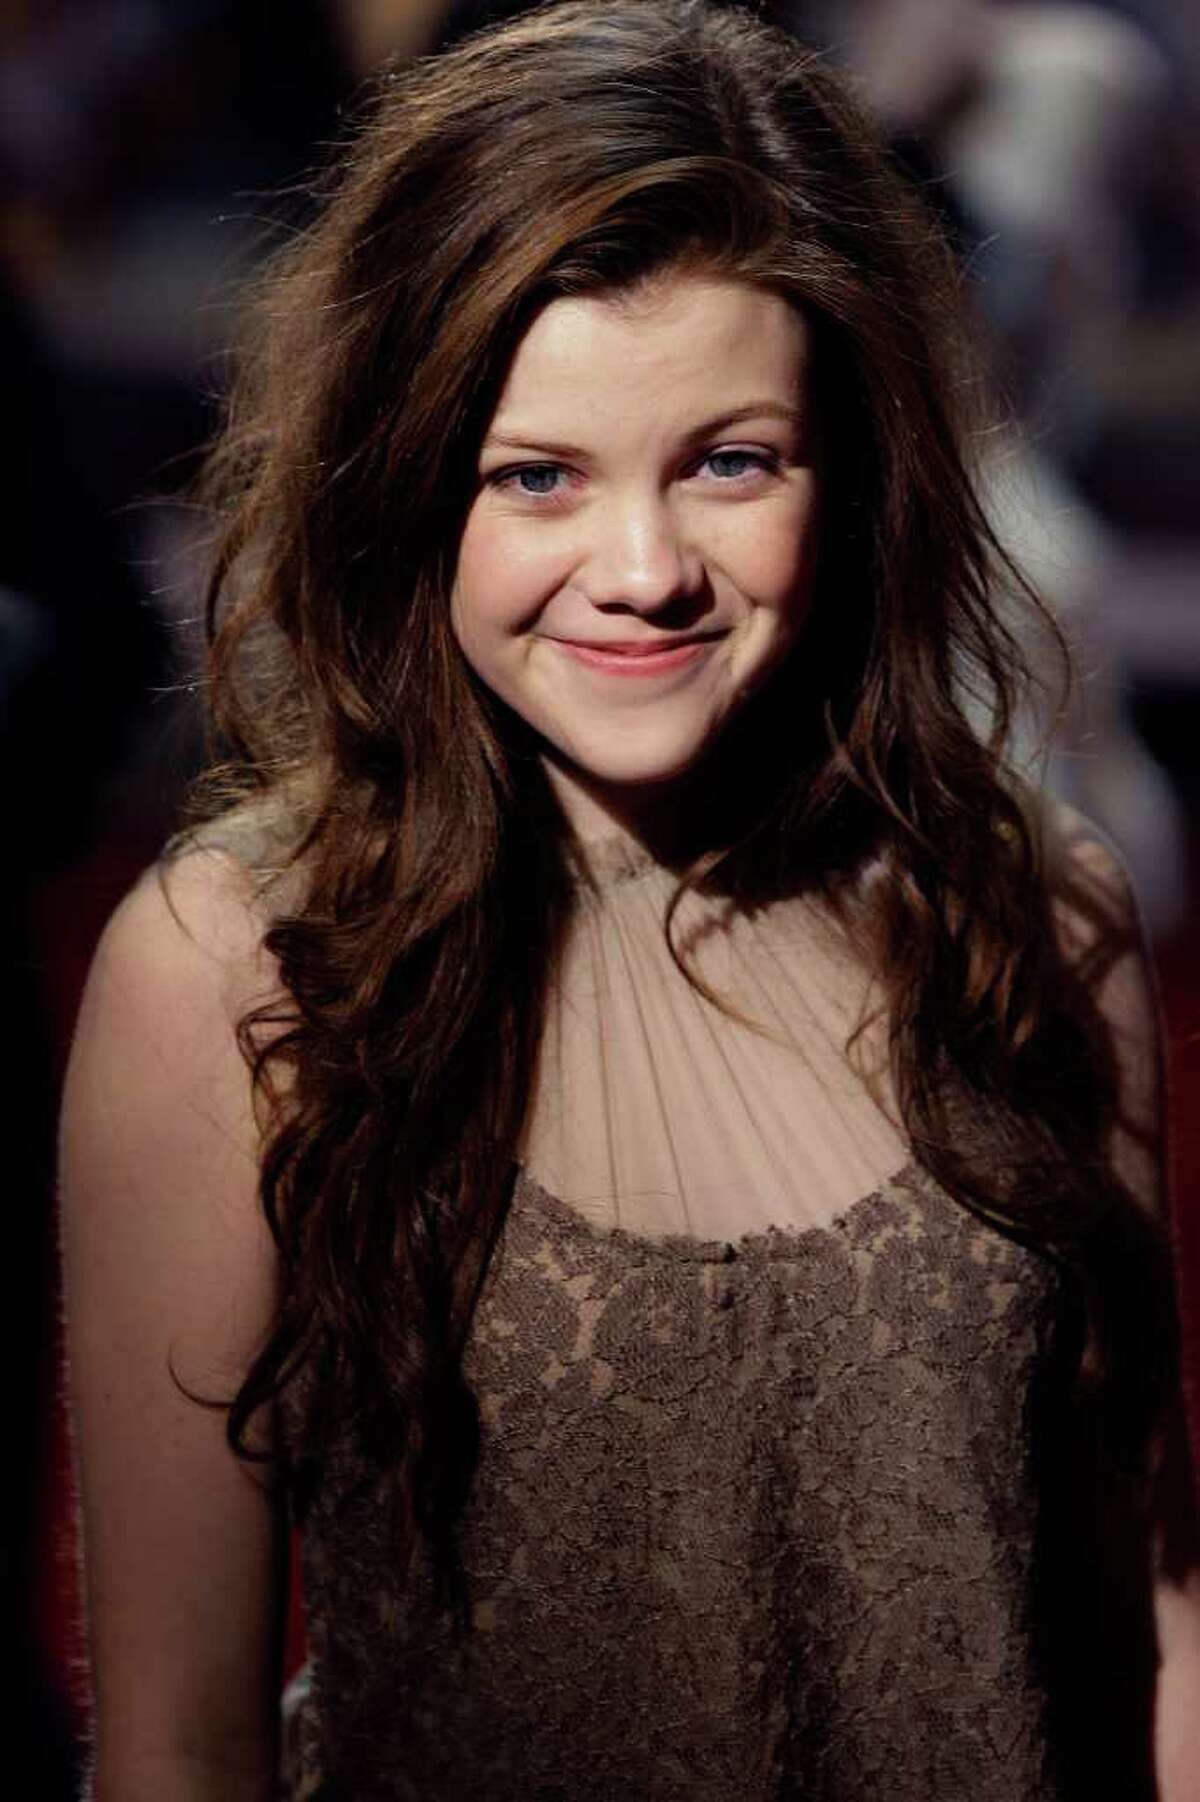 British actress Georgie Henley arrives for the World premiere of 'The Chronicles of Narnia: Voyage of the Dawn Treader', at a cinema in Leicester Square, London, Tuesday, Nov. 30, 2010. (AP Photo/Joel Ryan)